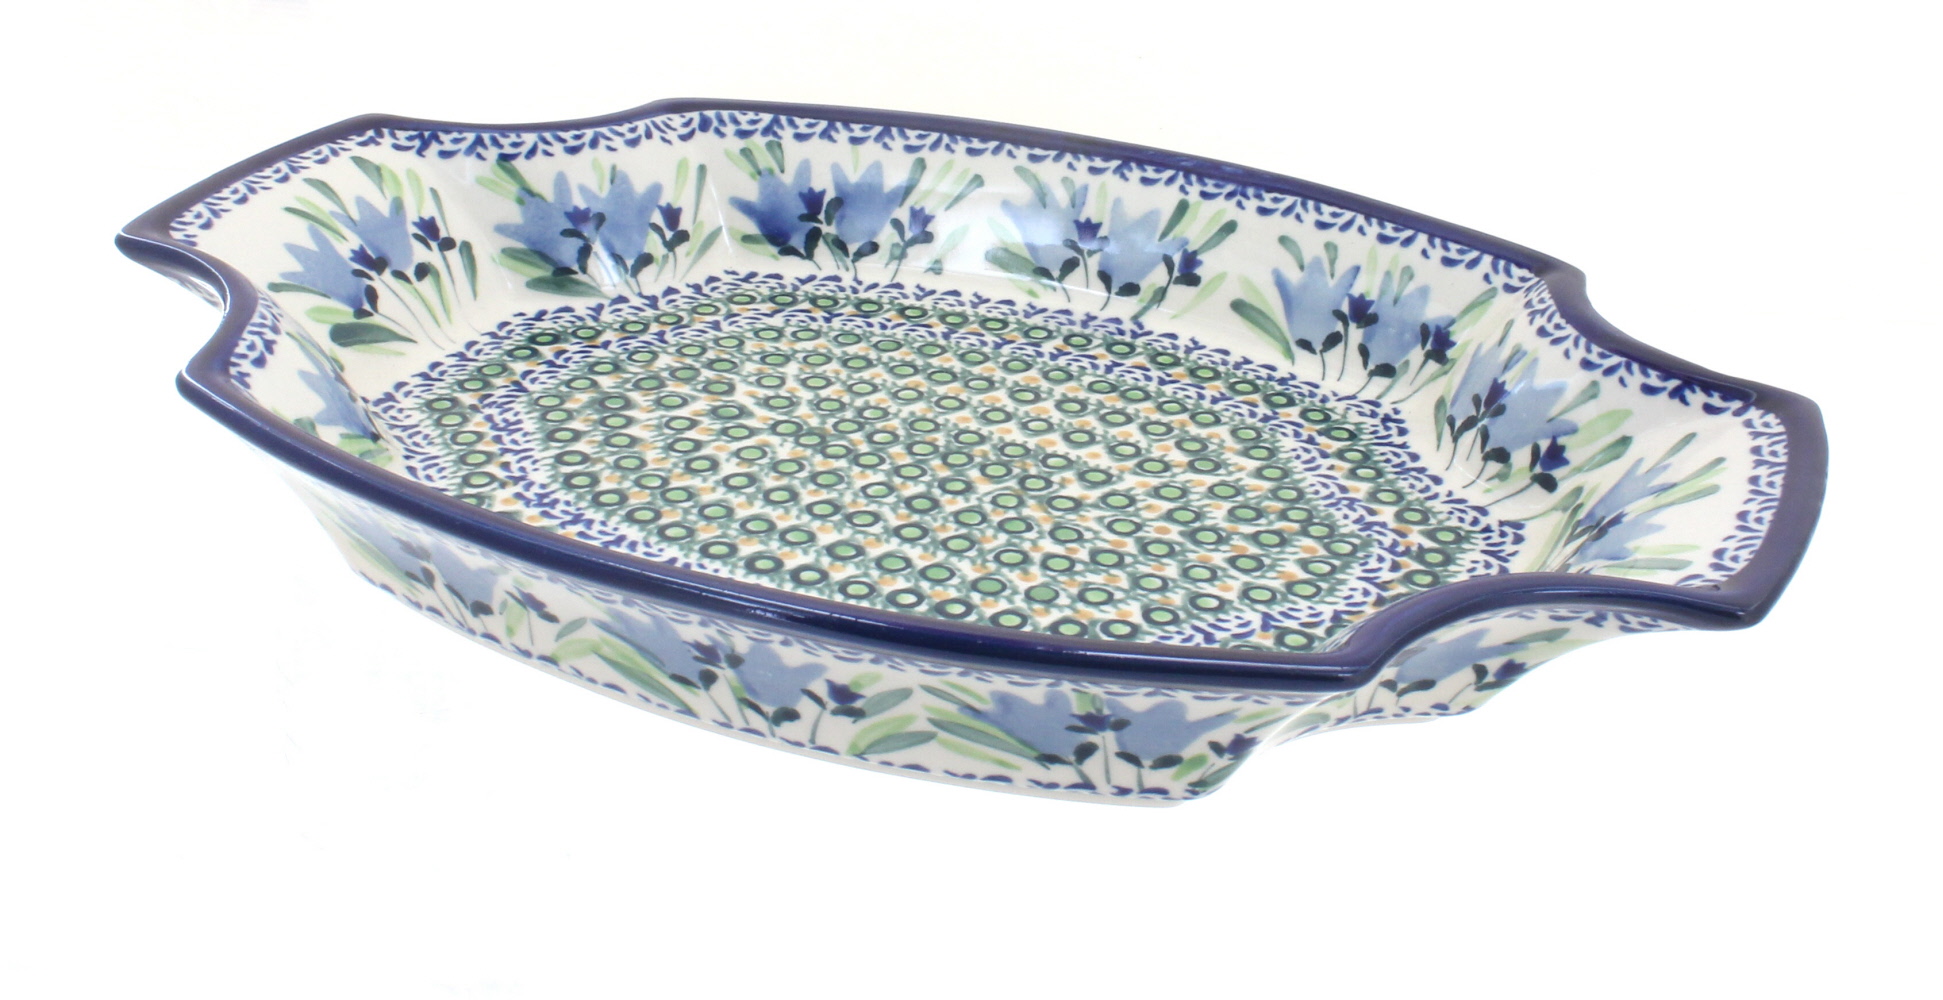 Water Tulip Polish Pottery 10 Serving Platter Plate